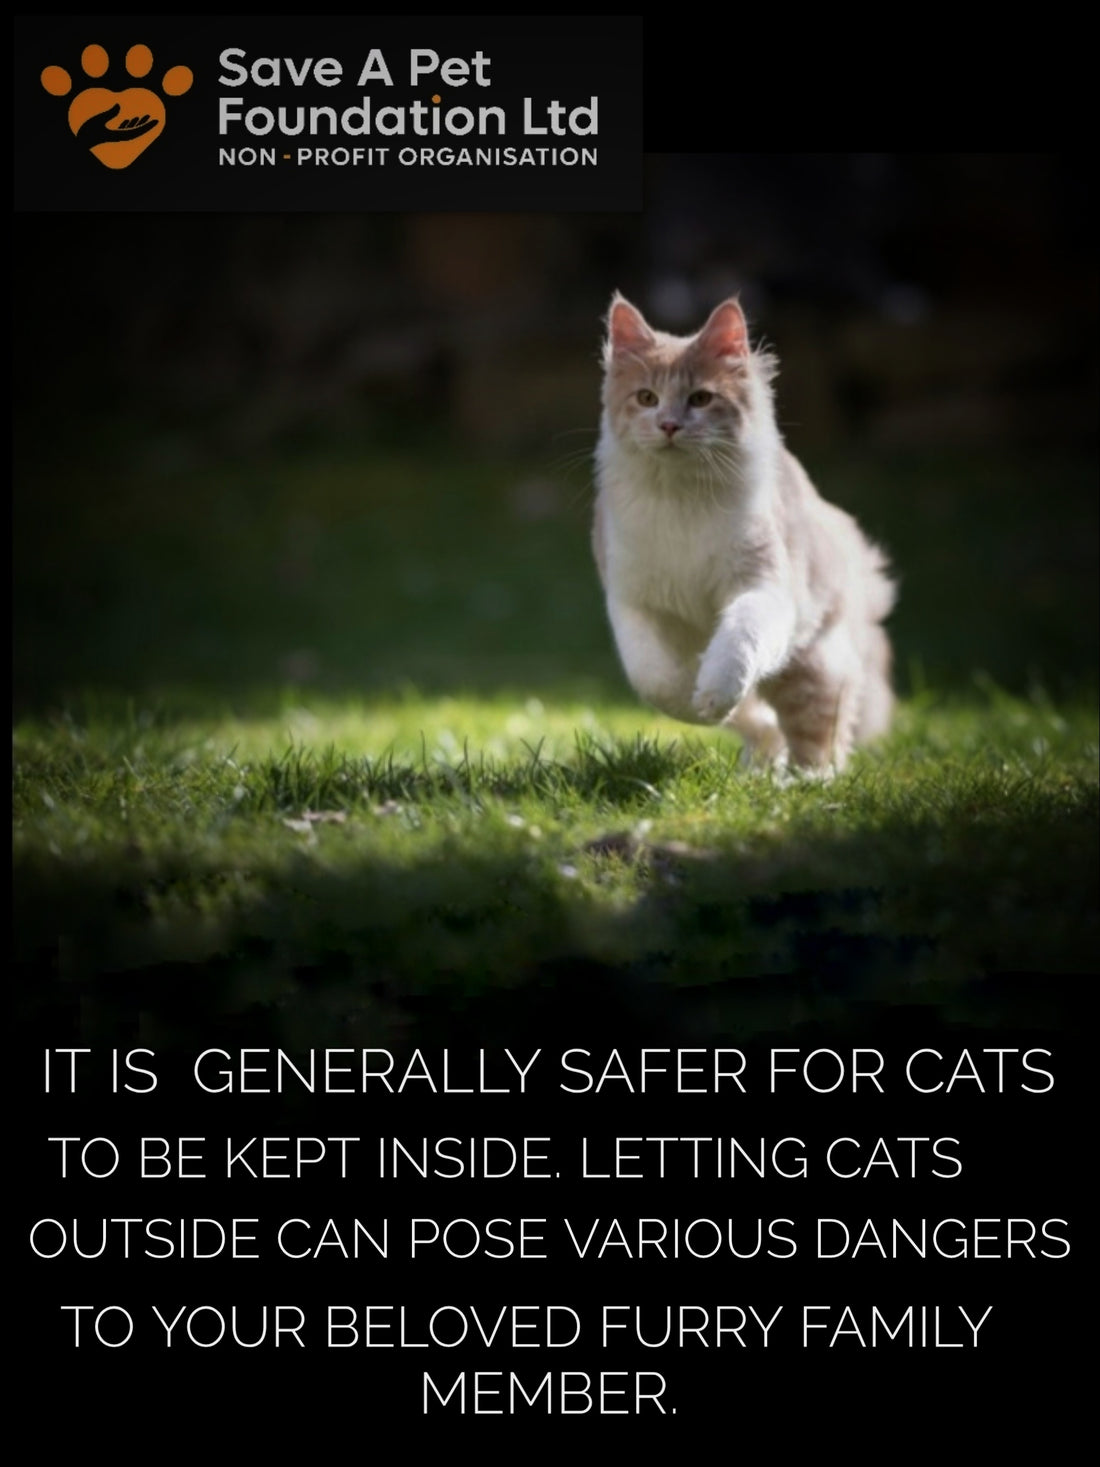 WHY YOU SHOULD KEEP YOUR CAT INDOORS